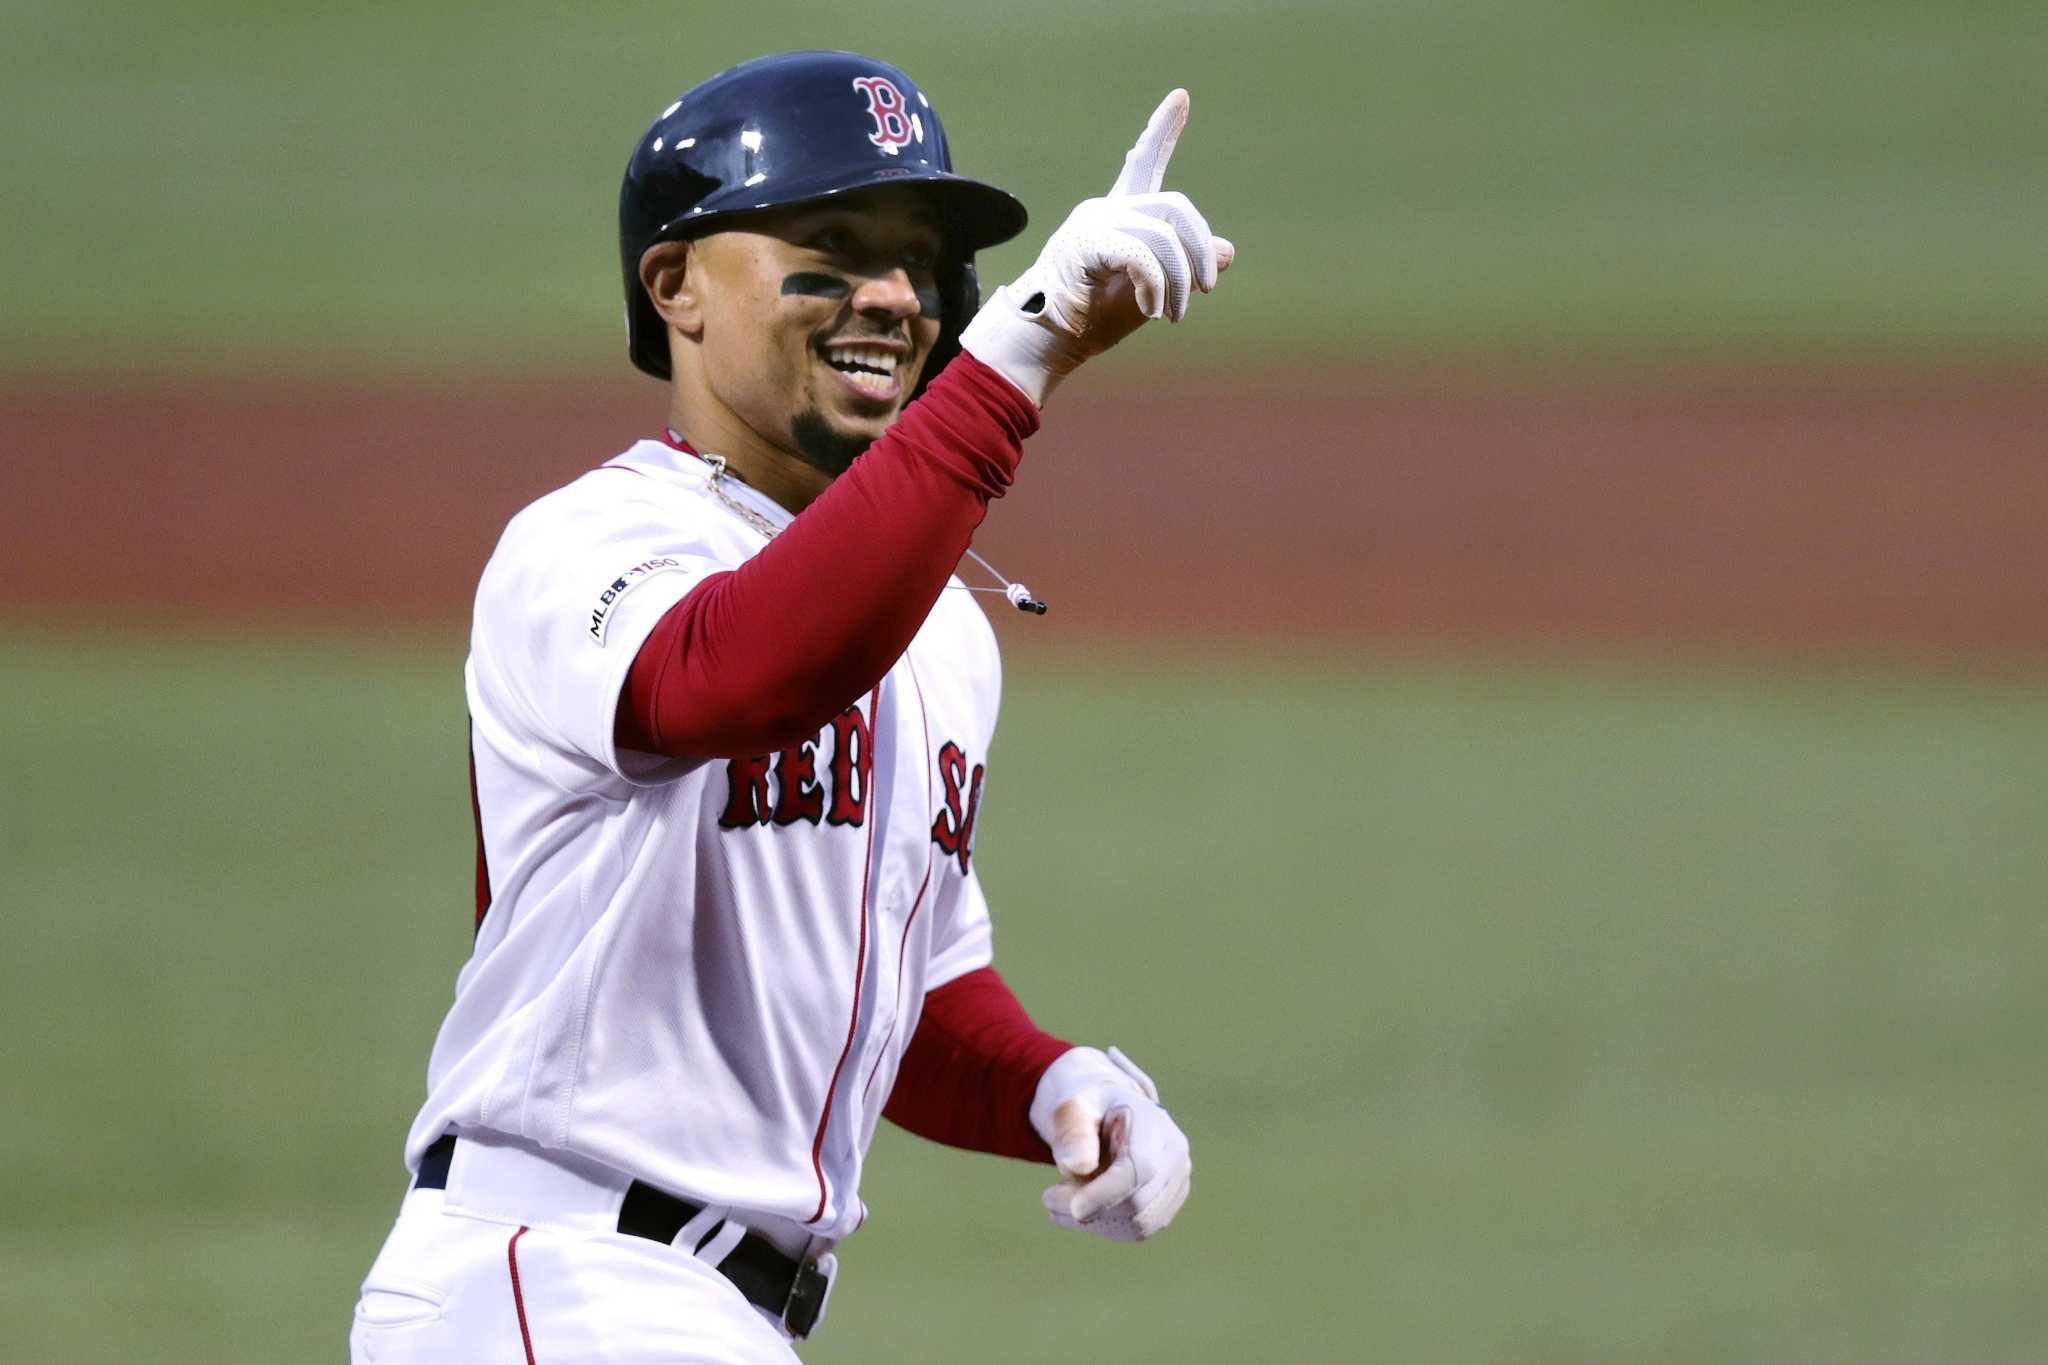 Red Sox outfielder Mookie Betts wins fourth Gold Glove in a row